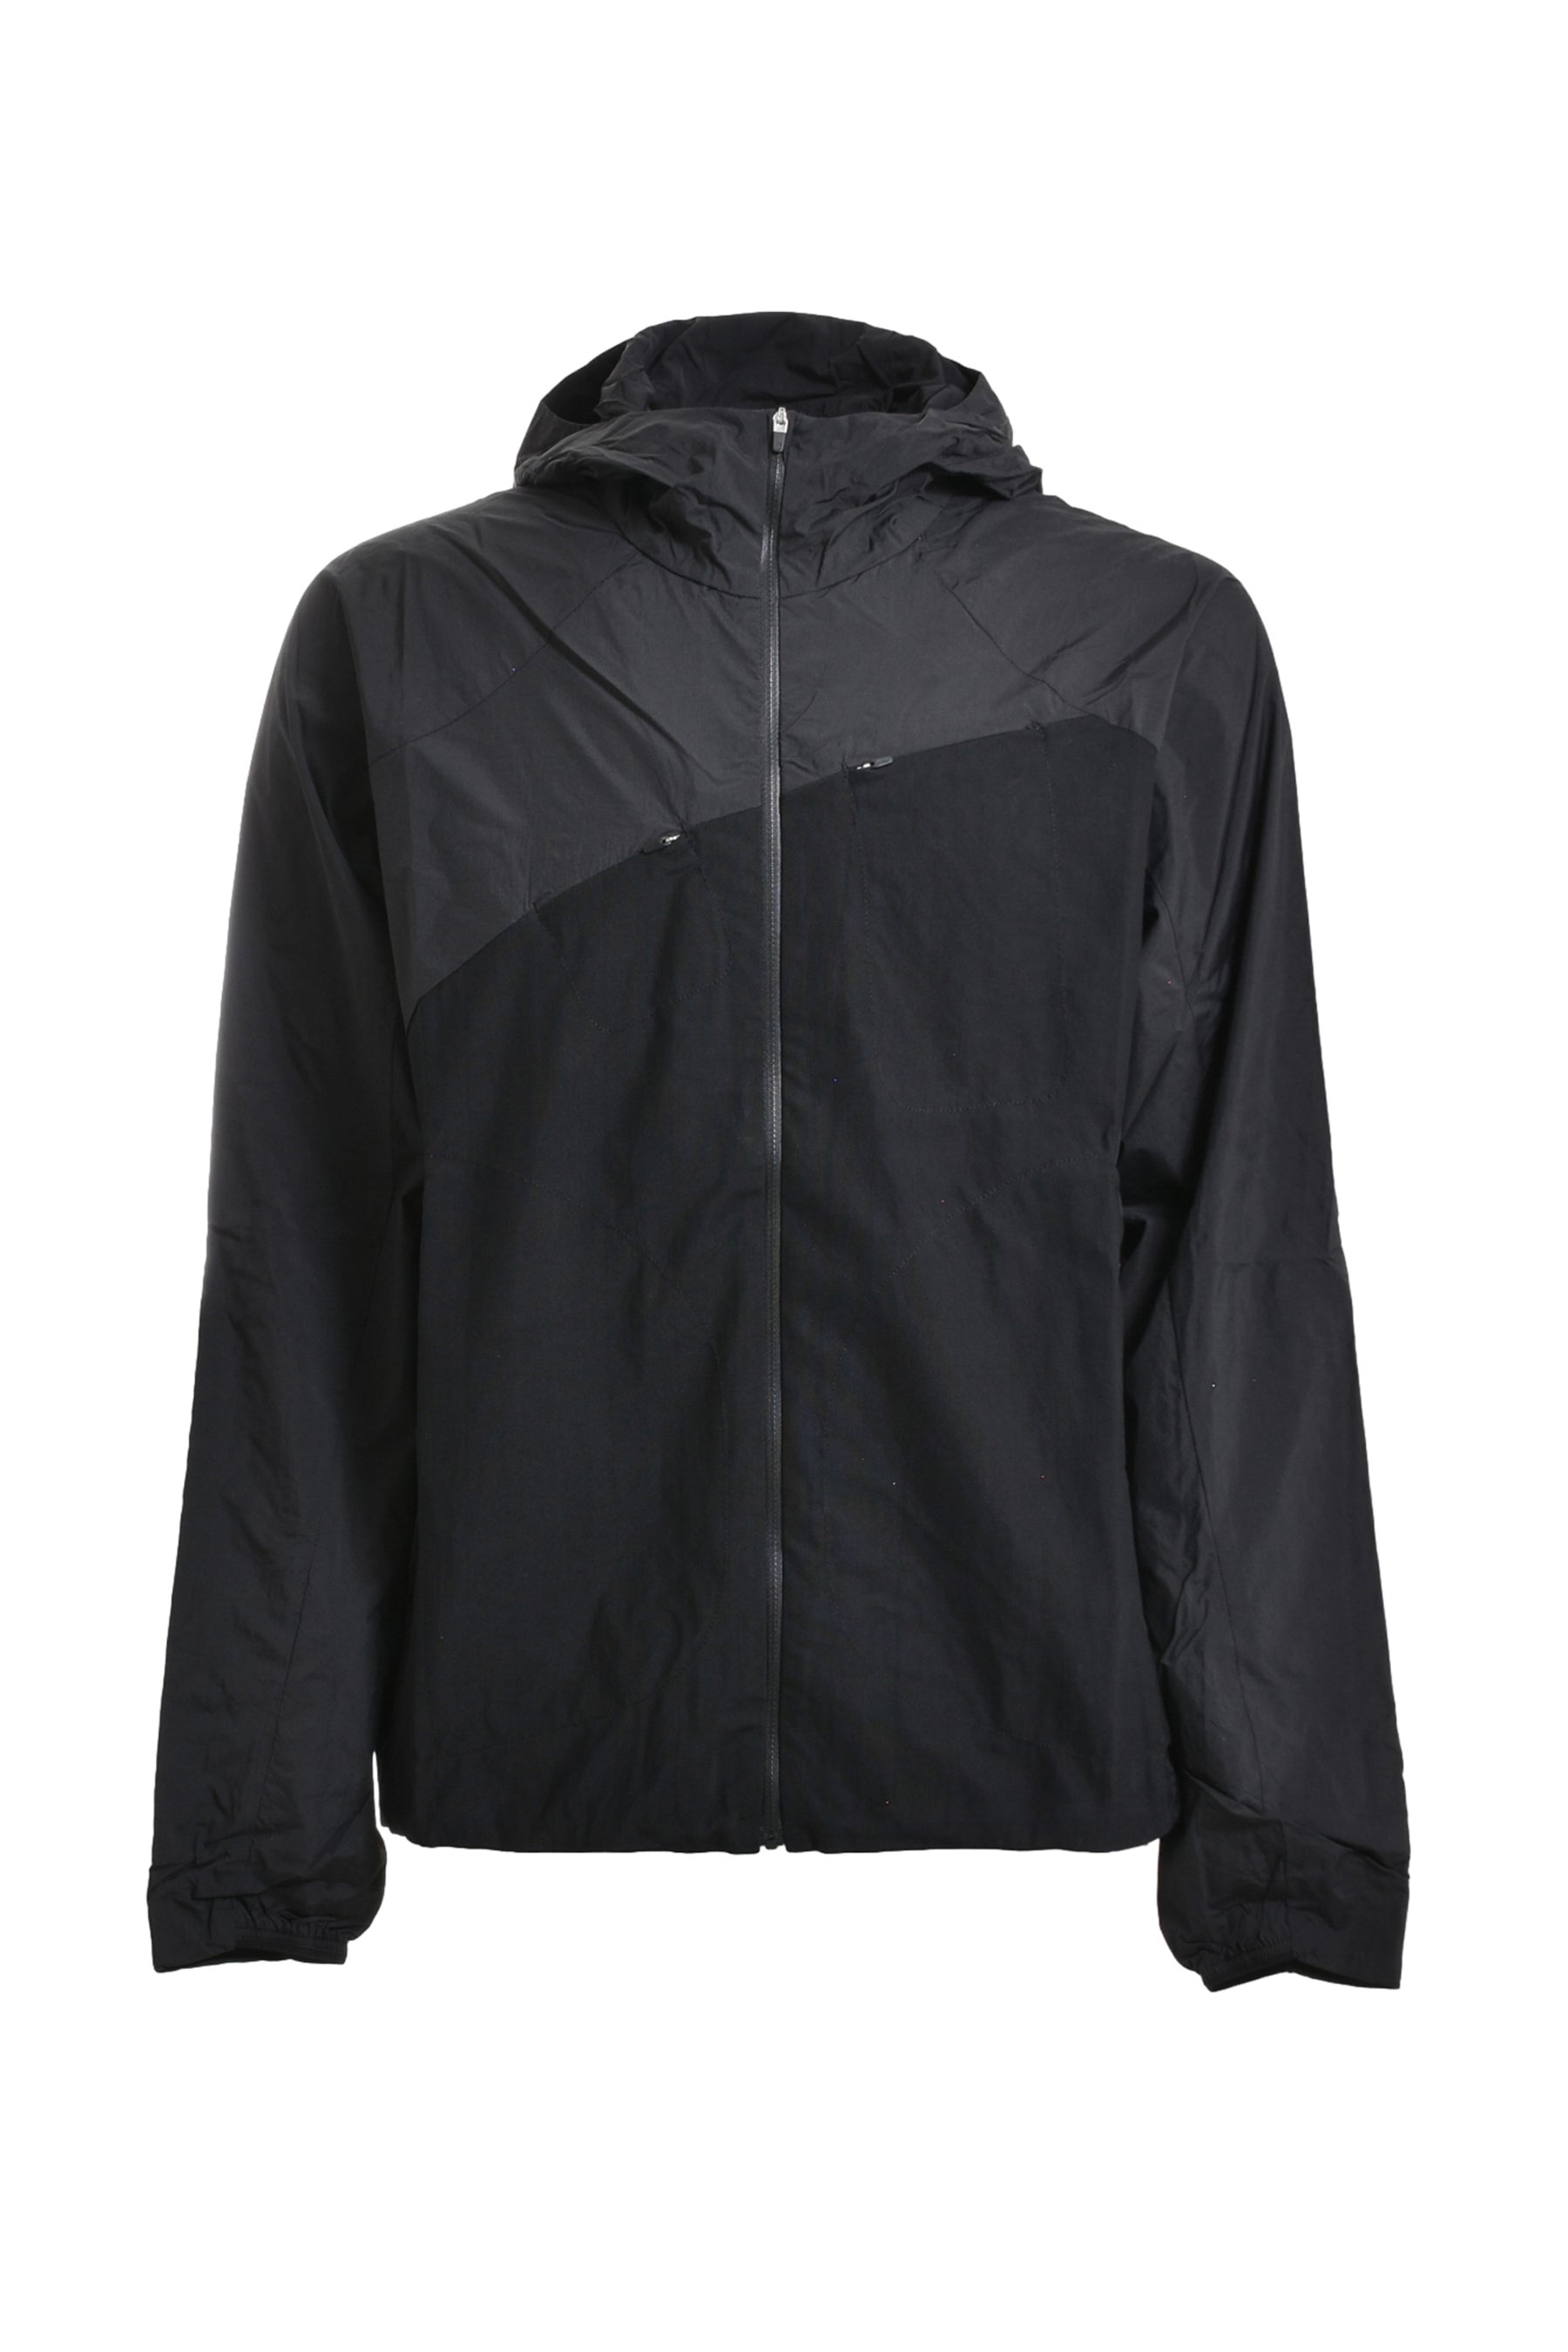 paf 5.0+ TECHNICAL JACKET RIGHTナイロンジャケット